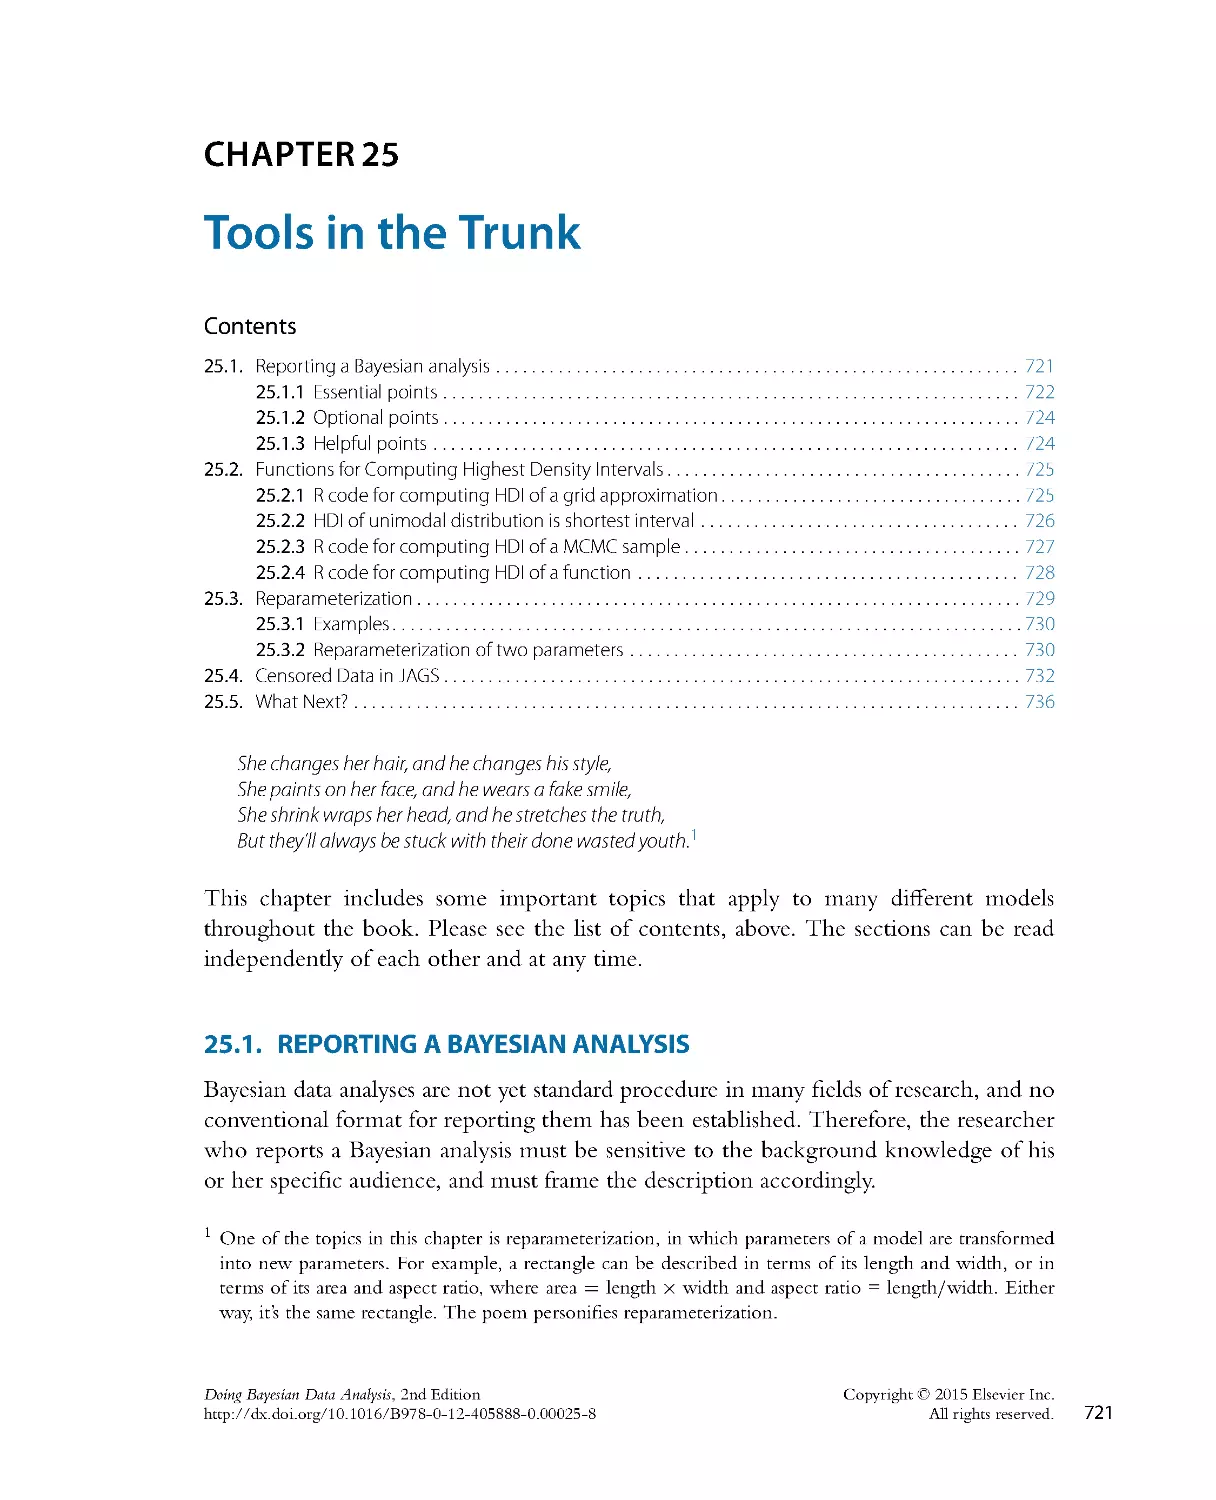 31. Chapter-25-Tools-in-the-Trunk_2015_Doing-Bayesian-Data-Analysis-Second-Edition-